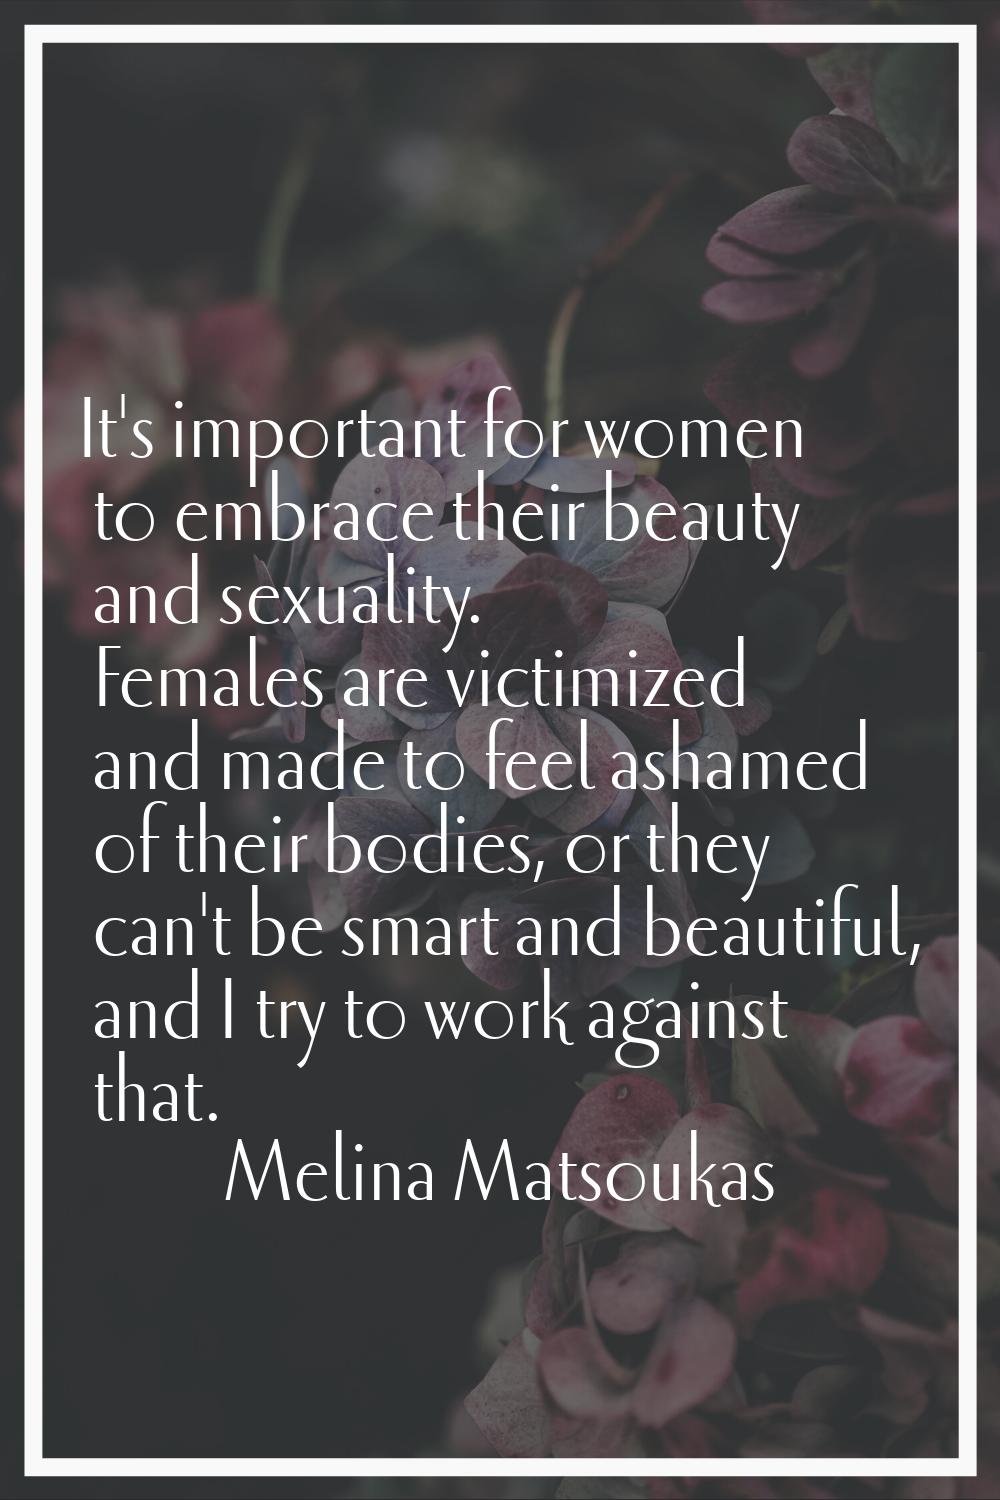 It's important for women to embrace their beauty and sexuality. Females are victimized and made to 